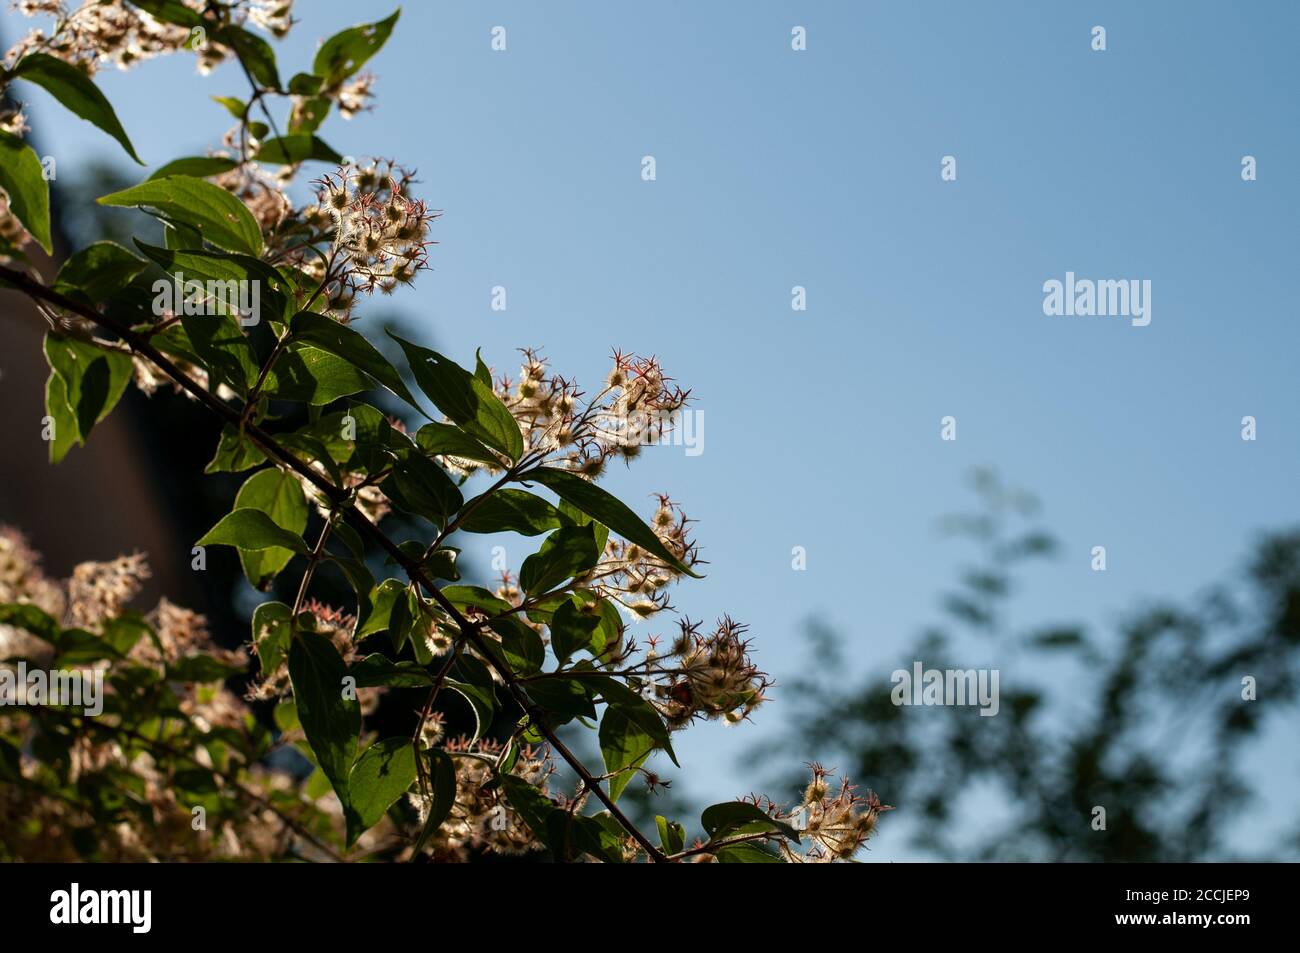 close-up of a twig of a weigela shrub with wilted flowers with blue sky Stock Photo